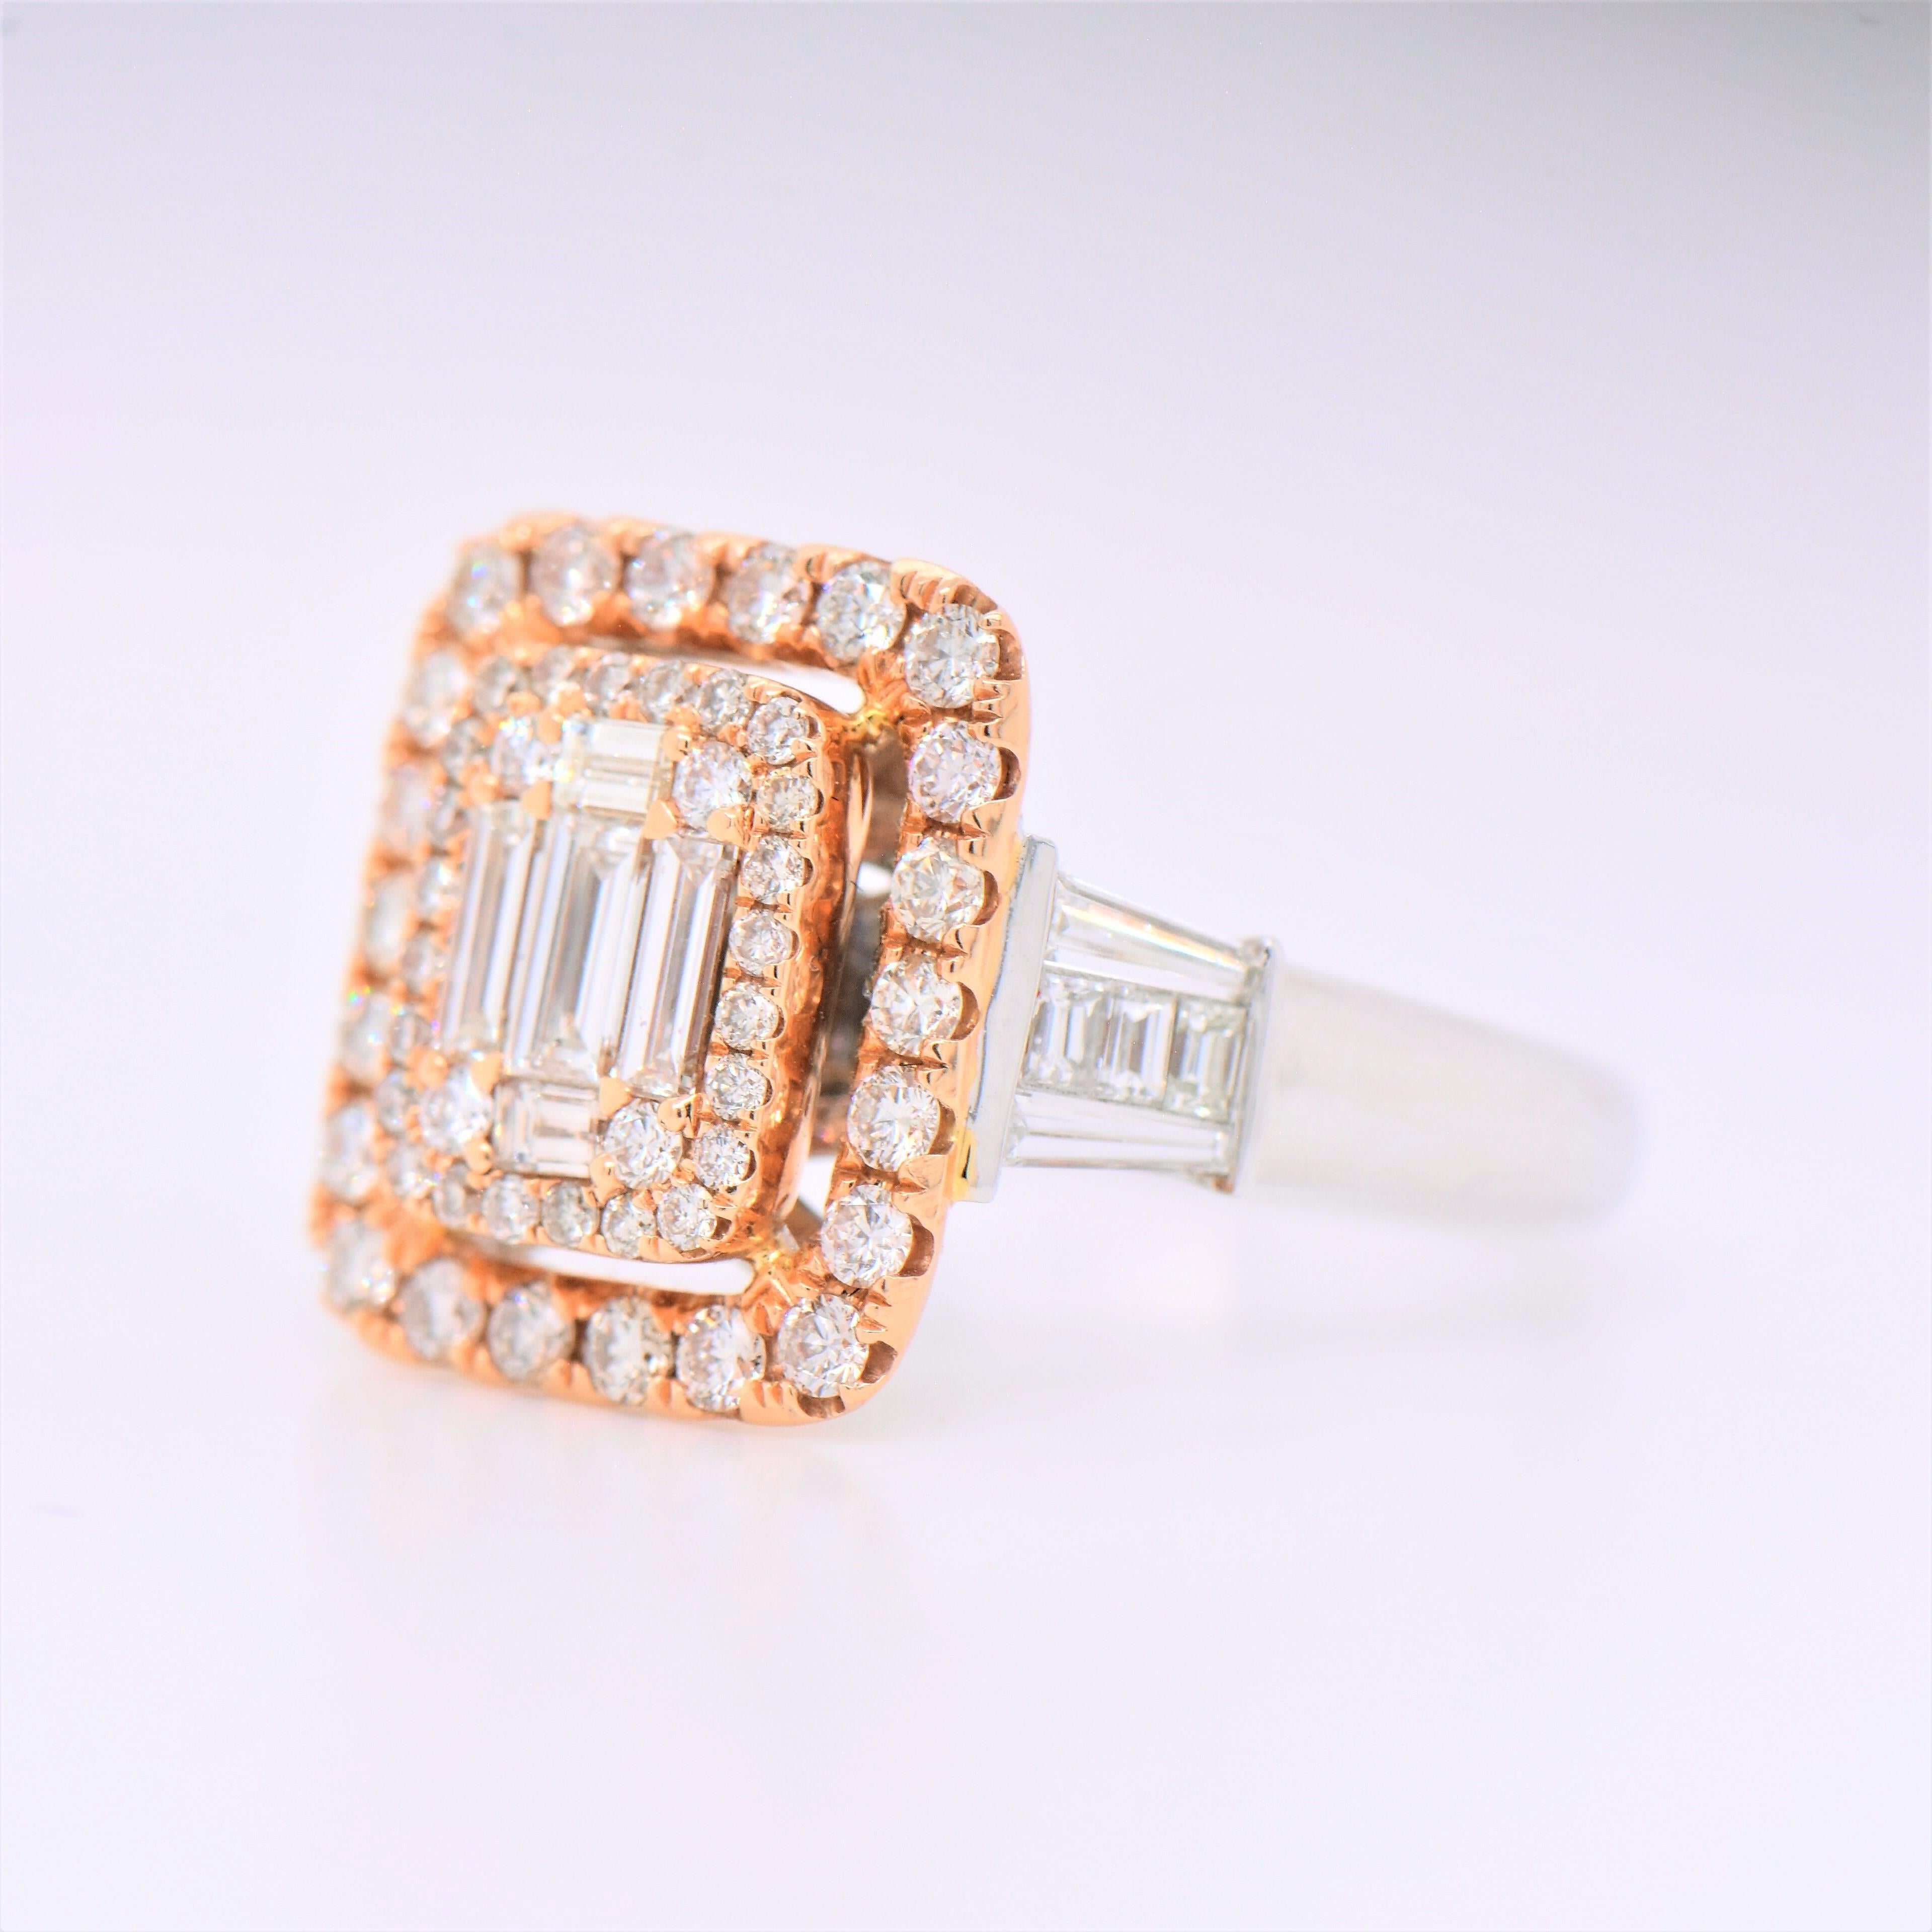 A glamorous alternative to the traditional solitaire, this diamond engagement ring will take her breath away. Crafted in 18K white and rose gold, the eye is drawn to the squared center frame set with a trio of baguette-cut diamonds. A double frame